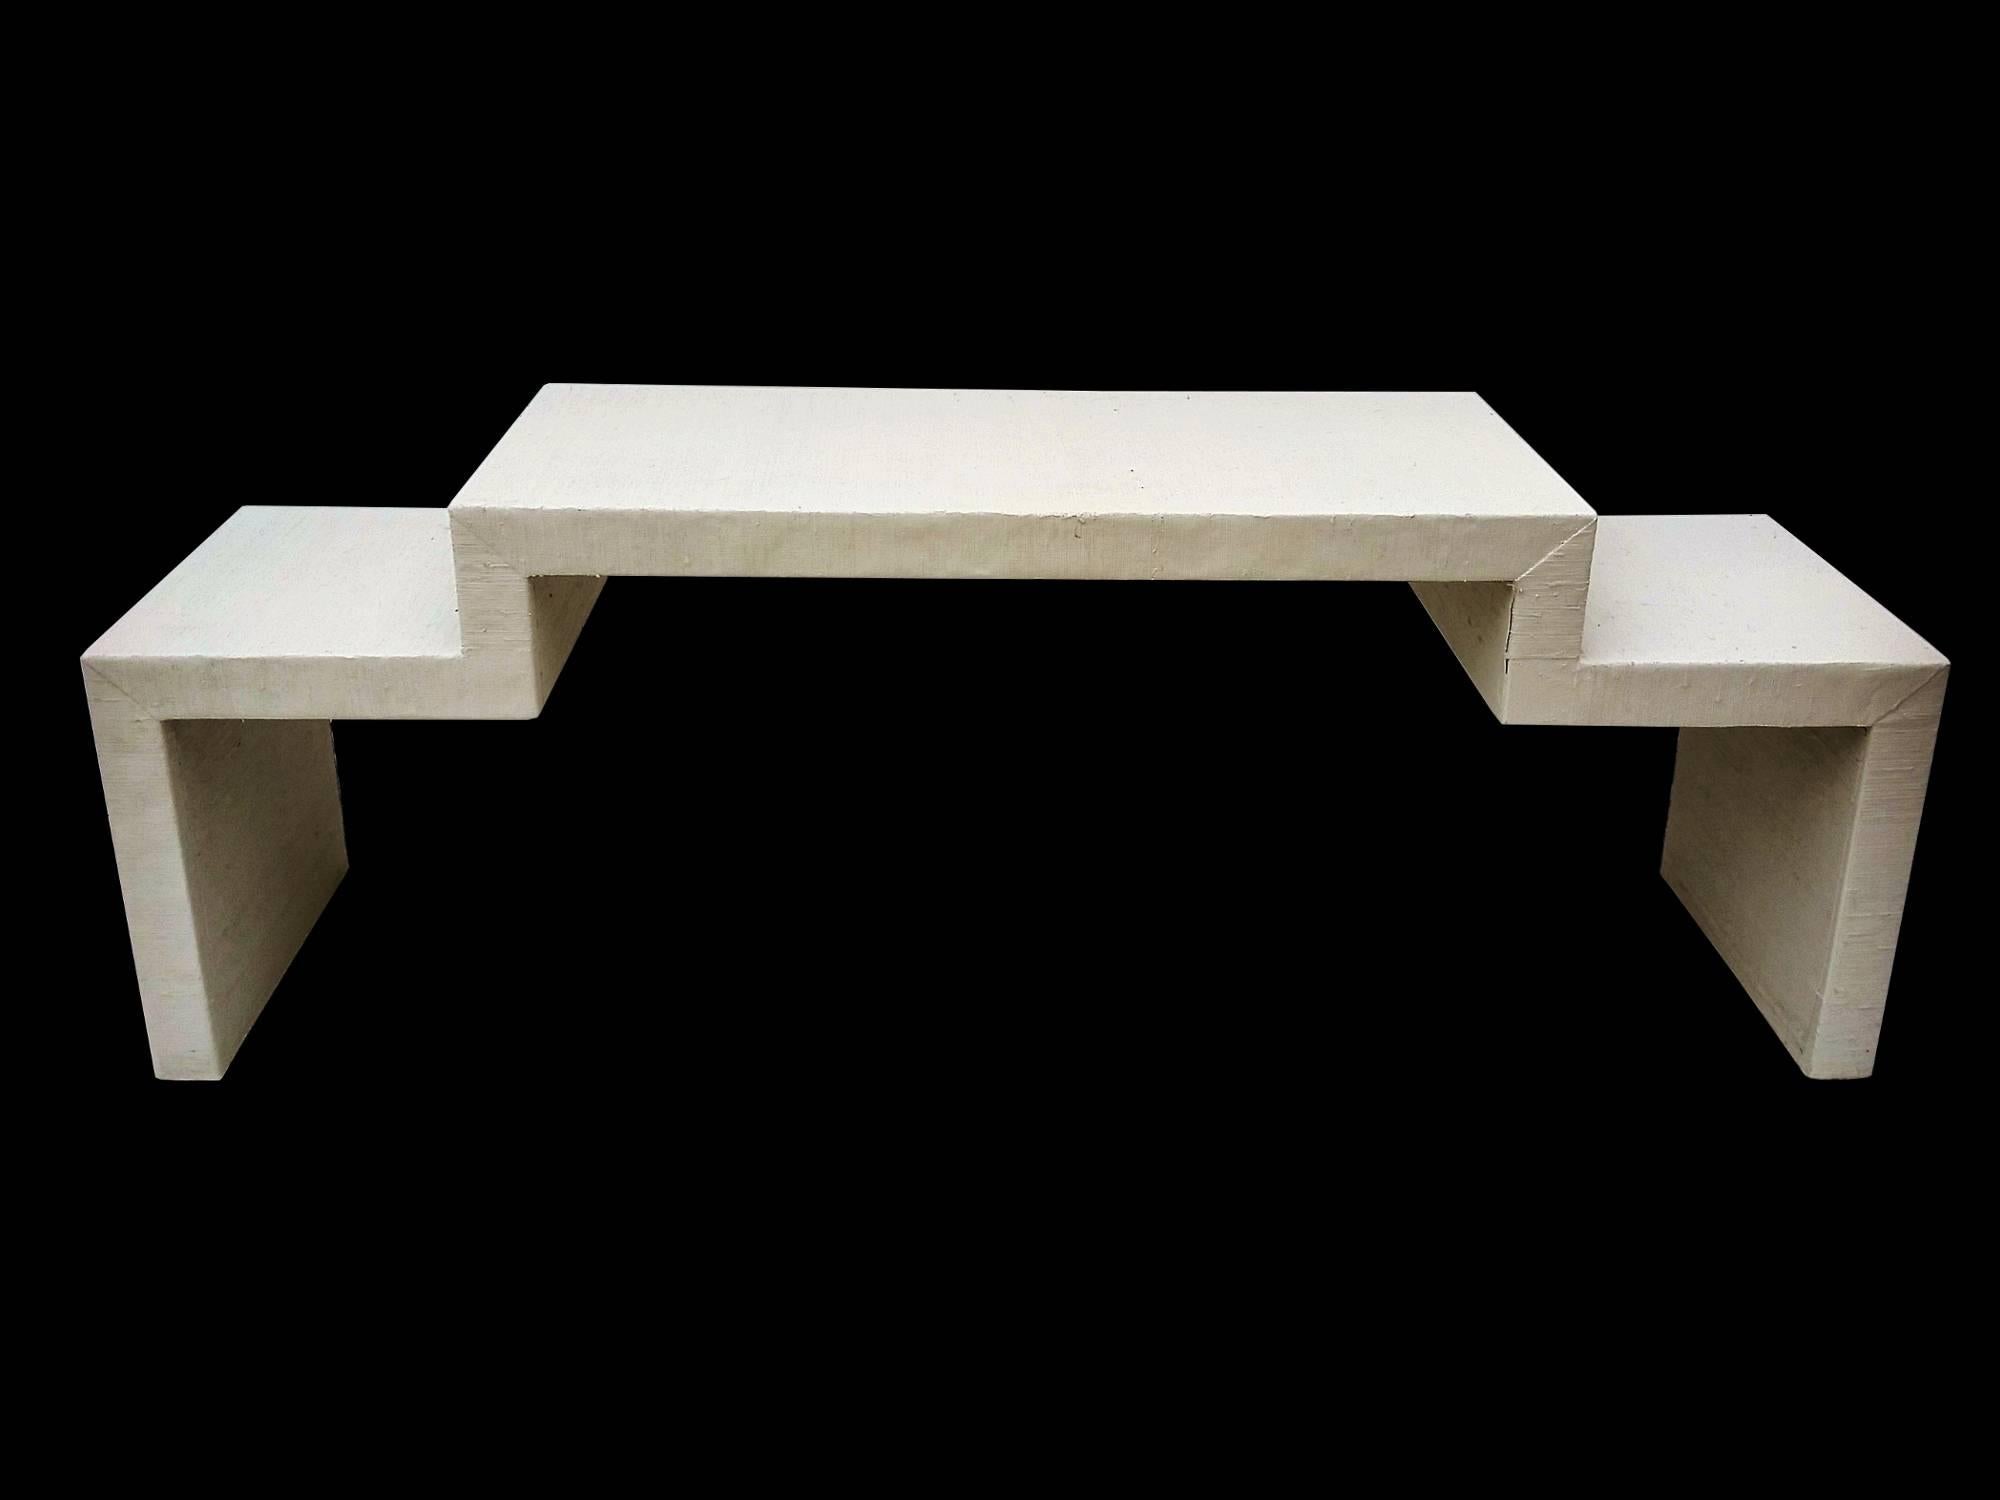 Stunning and unique coffee table having sleek modern lines and a painted grasscloth wrapped finish. The late 1970s table is constructed of heavy and very strong composite material that gives it a very sturdy feel. The table is quite heavy at around